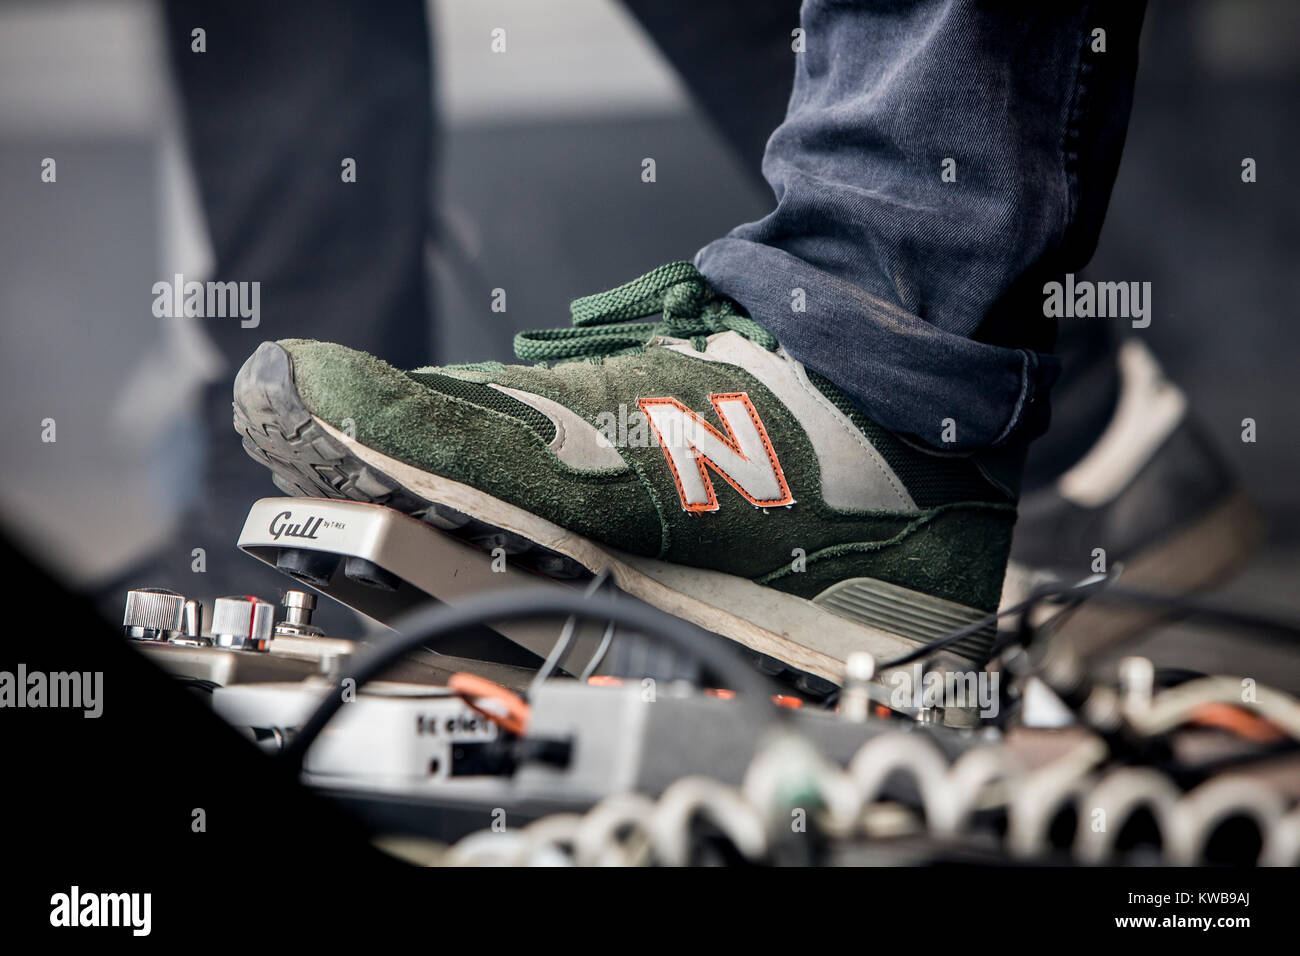 A musician and guitarist wears New Balance sneakers on stage at a live  concert. Denmark, 02/07 2014 Stock Photo - Alamy